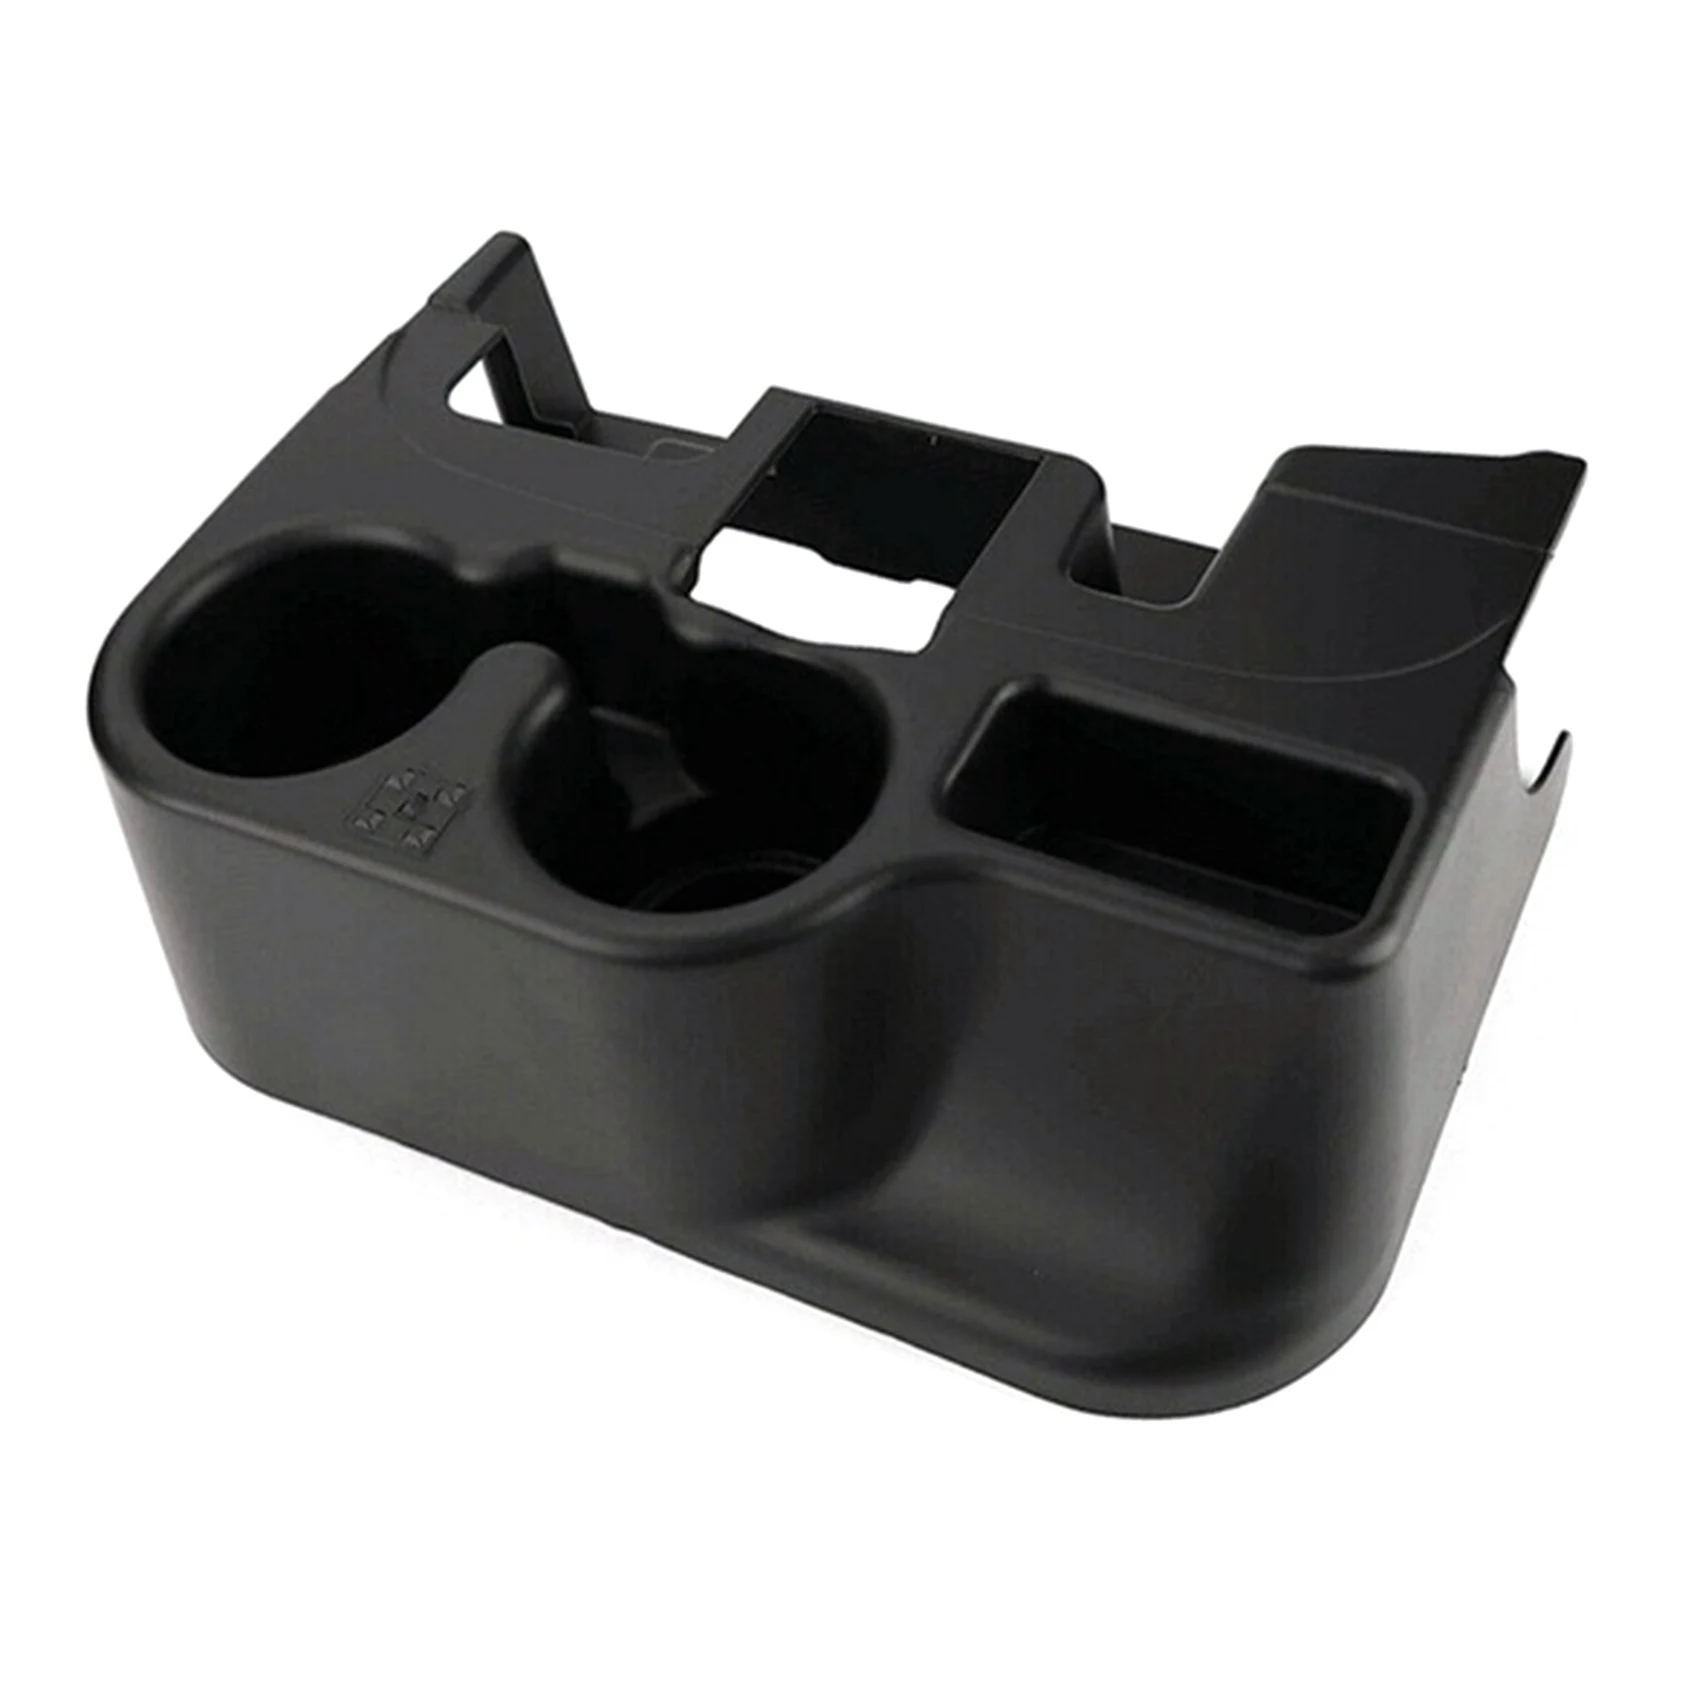 

Front Armrest Center Console Drink Water Cup Bottle Holder for DODGE RAM 1500/2500/3500 2003-2012 Truck SS281AZAA Black